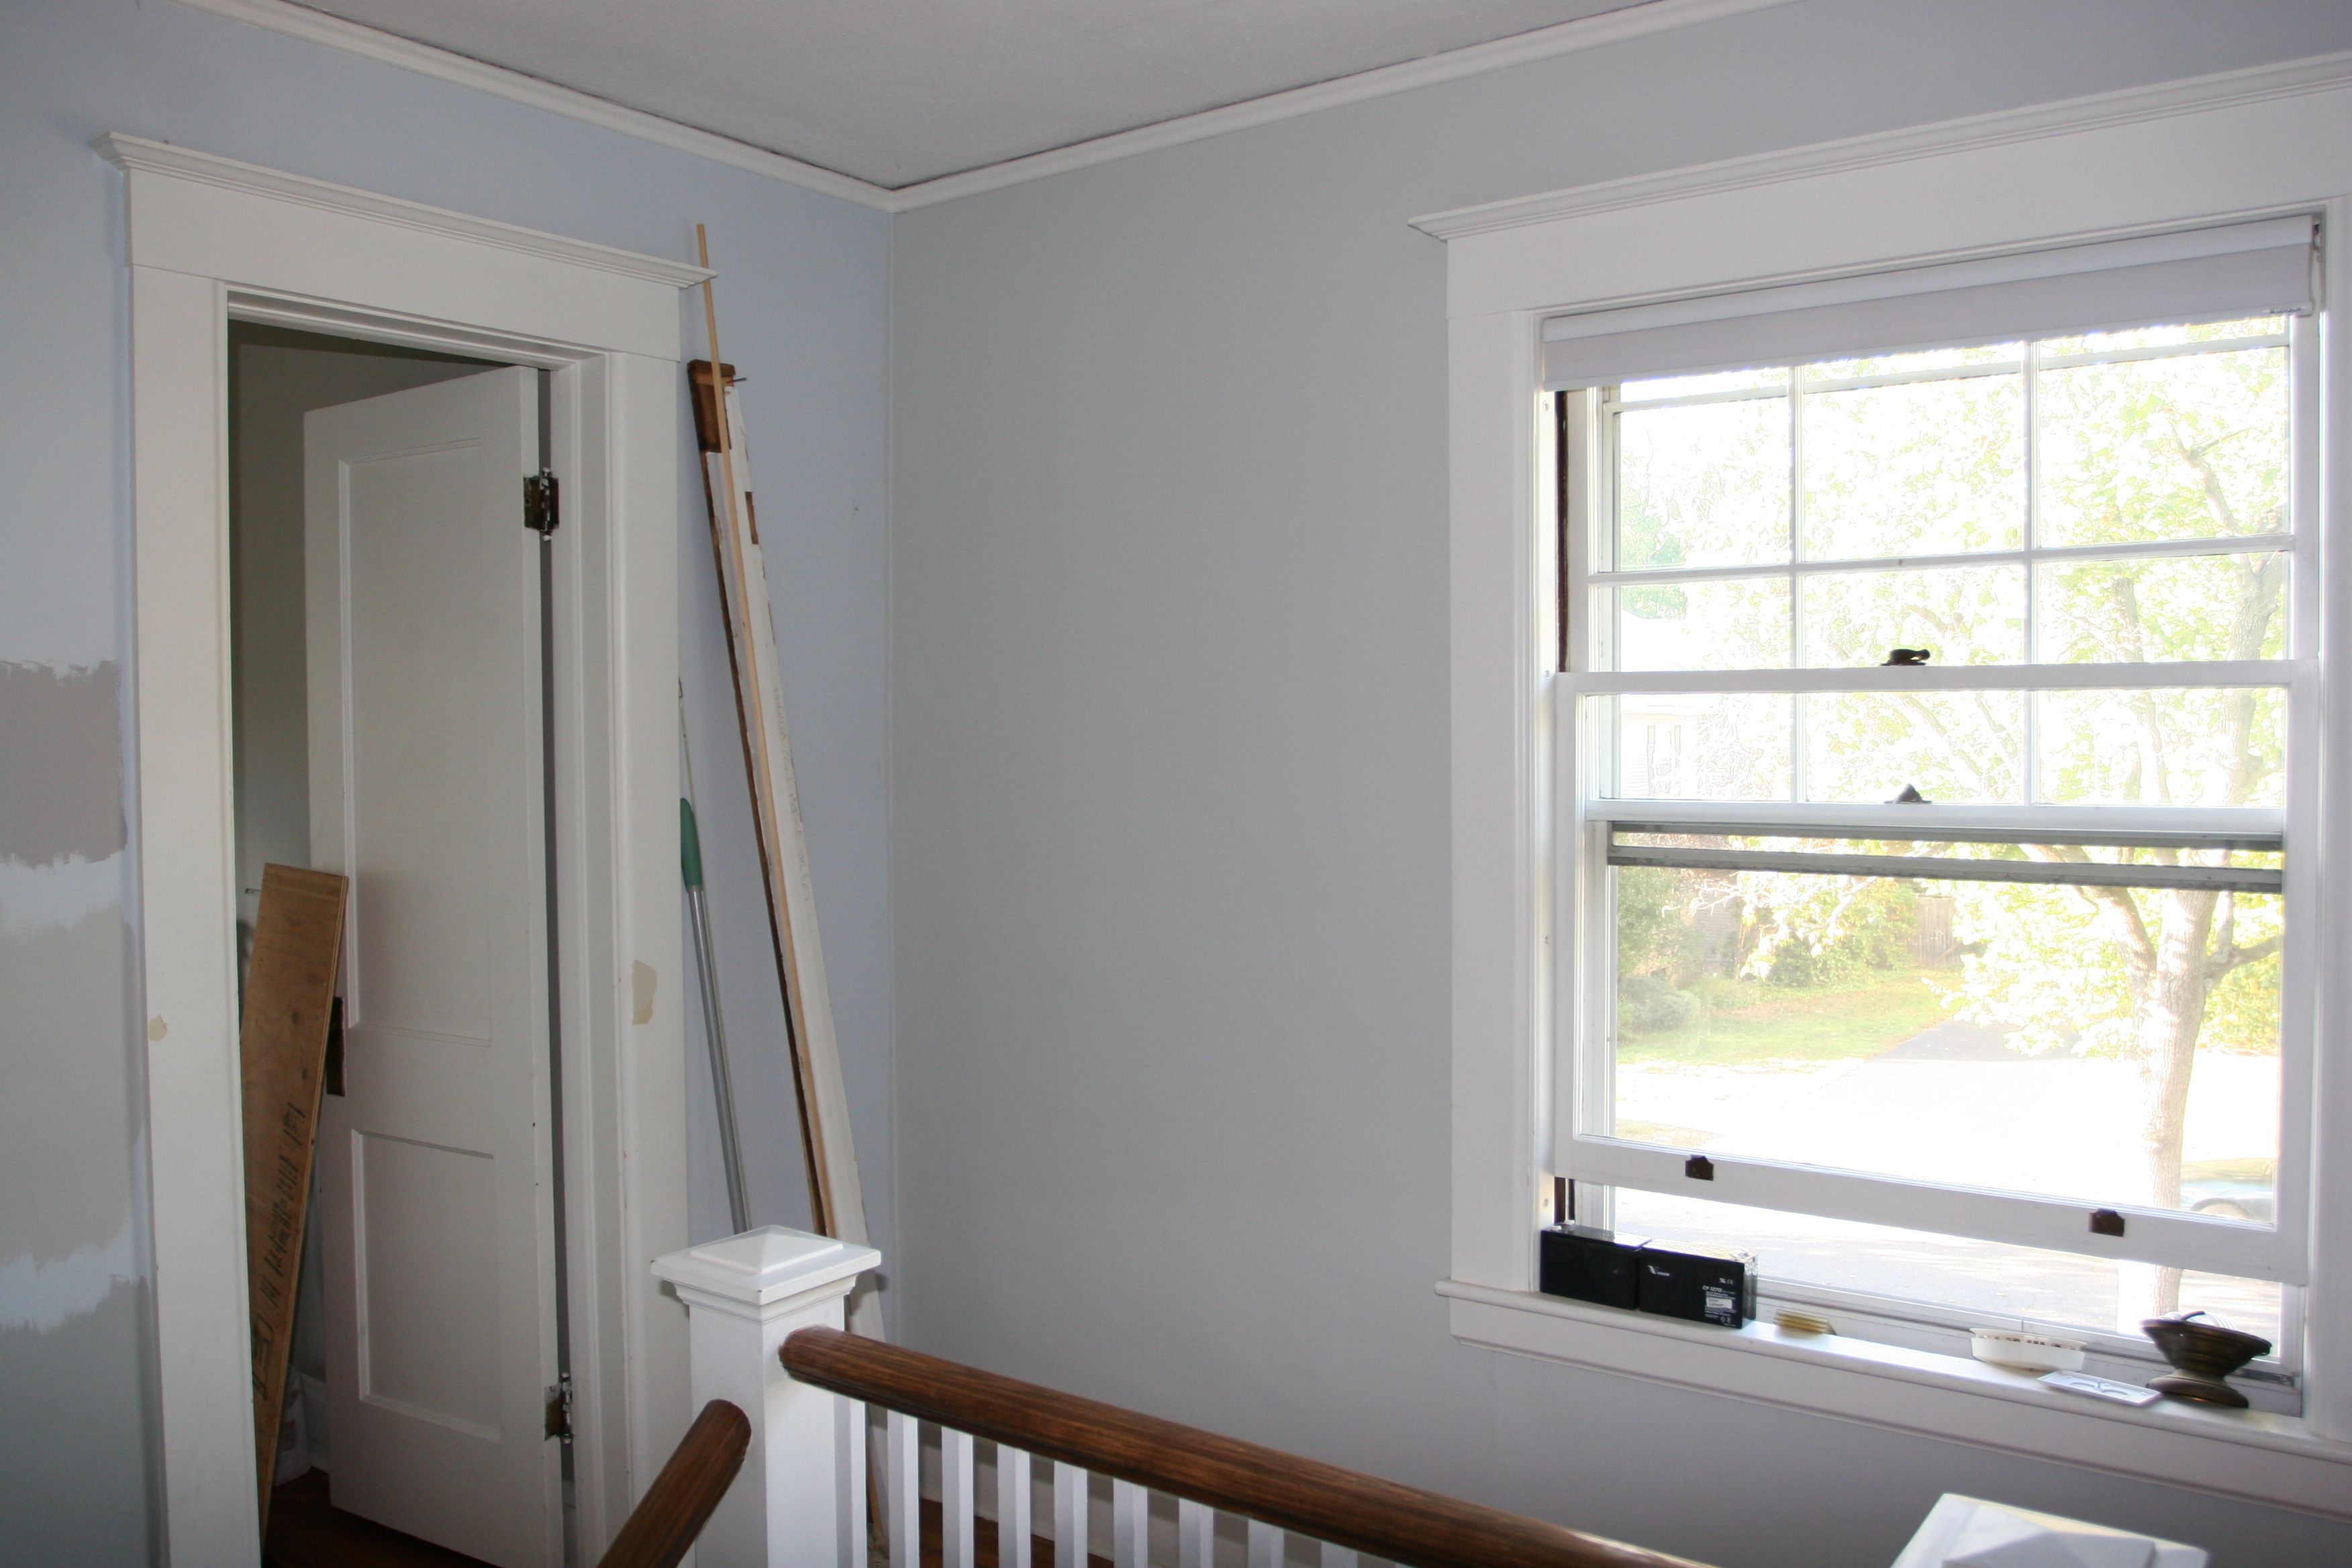 The new color is the grey (Benjamin Moore: Cliffside Grey). The old color is the blue. We're making progress!